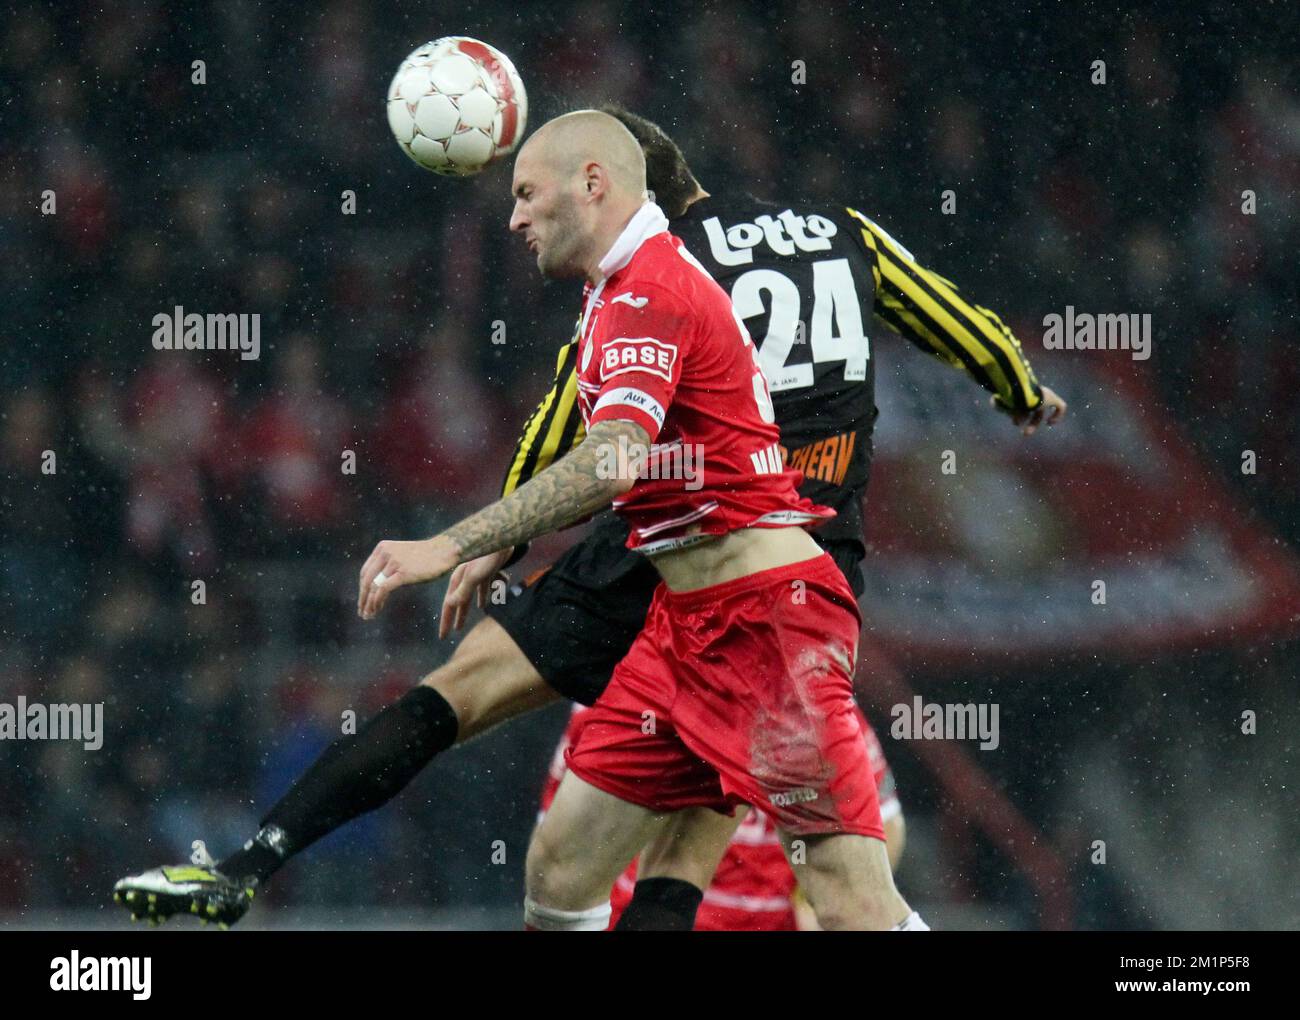 20121123 - LIEGE, BELGIUM: Standard's Jelle Van Damme and Lierse's Kostadin Hazurov fight for the ball during the Jupiler Pro League match between Standard and Lierse, in Liege, Friday 23 November 2012, on day 17 of the Belgian soccer championship. BELGA PHOTO VIRGINIE LEFOUR Stock Photo